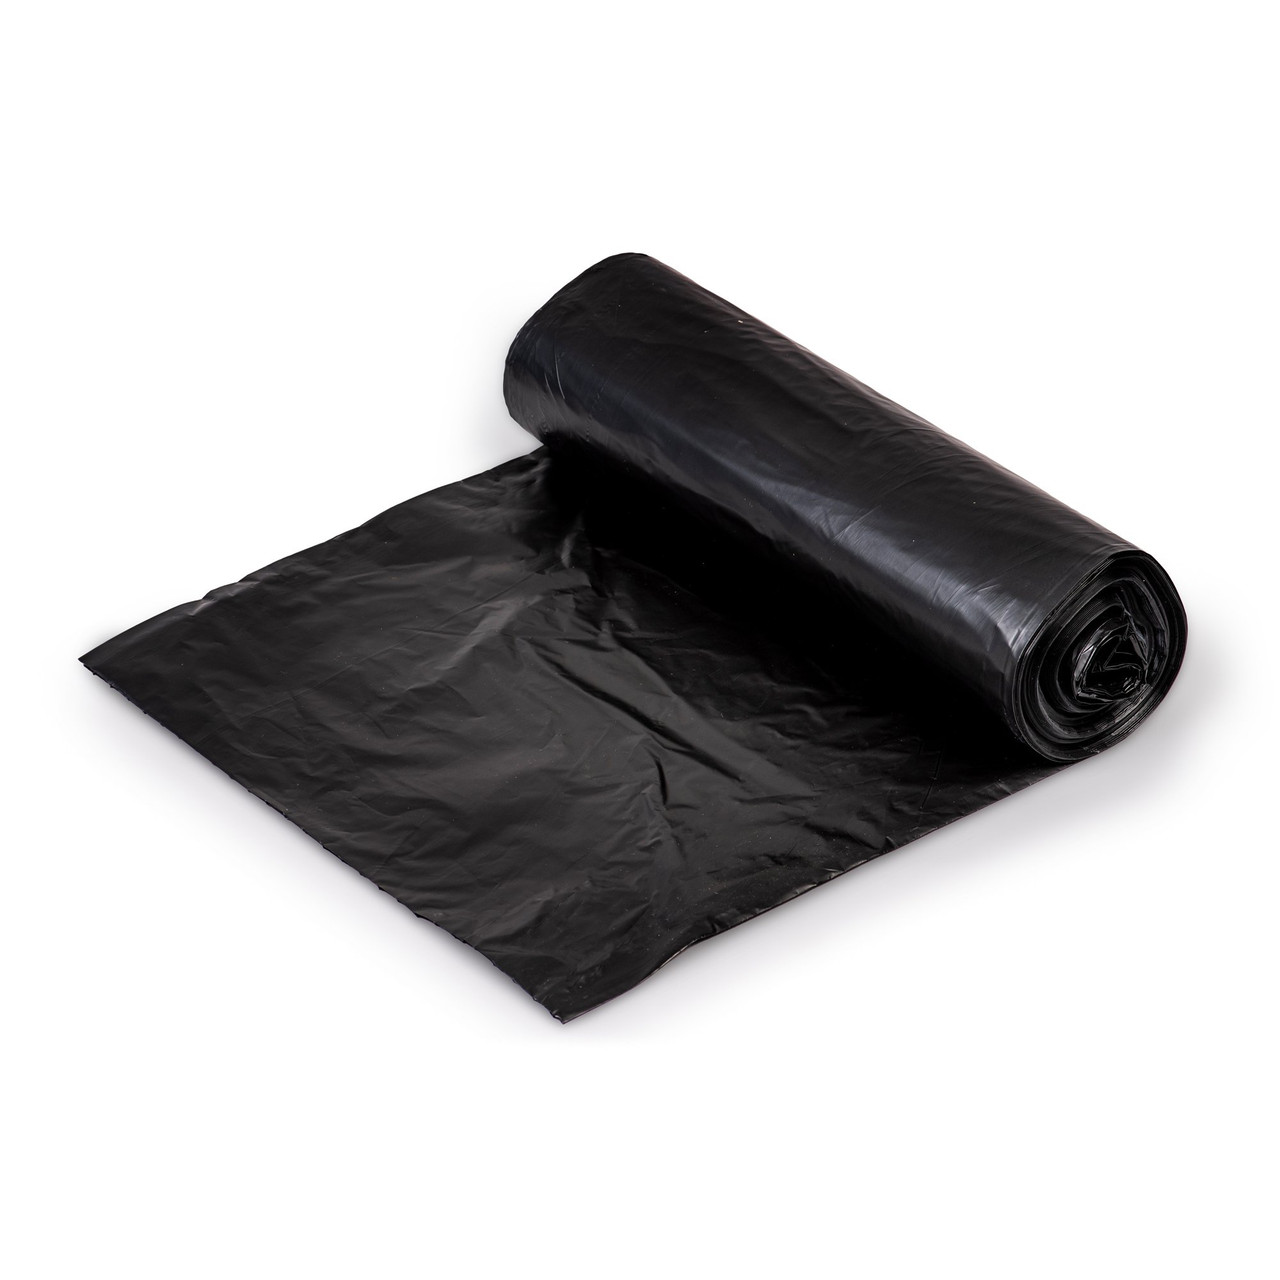 Nicesh 1.6 Gallon Small Trash Bags, Black, Clear and White, 75 Counts